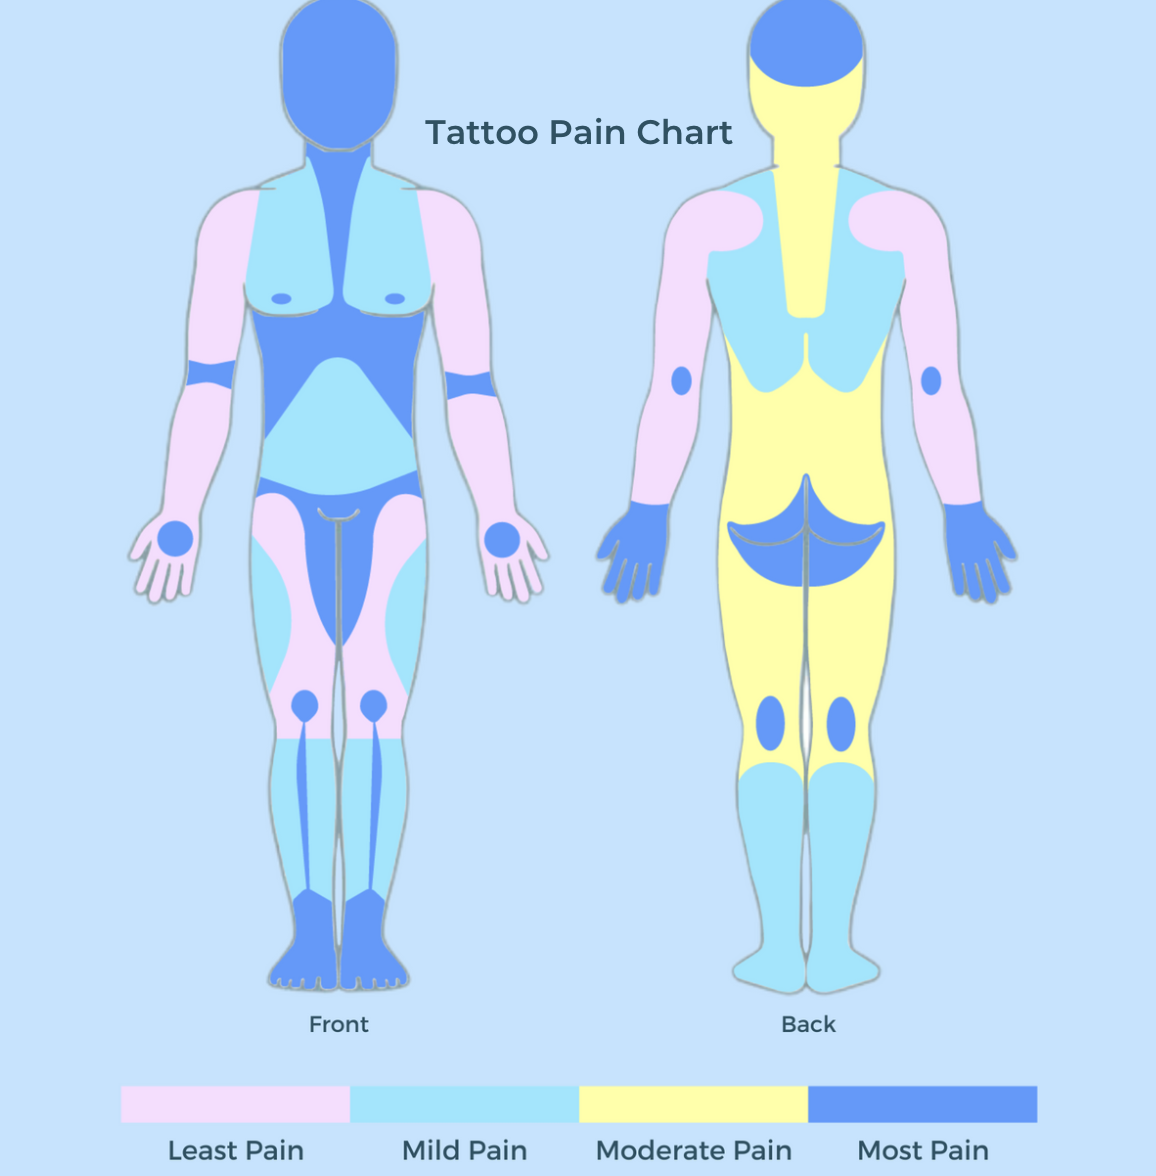 Tattoo Pain Chart: Ranking Body Parts by Tattoo Pain Levels